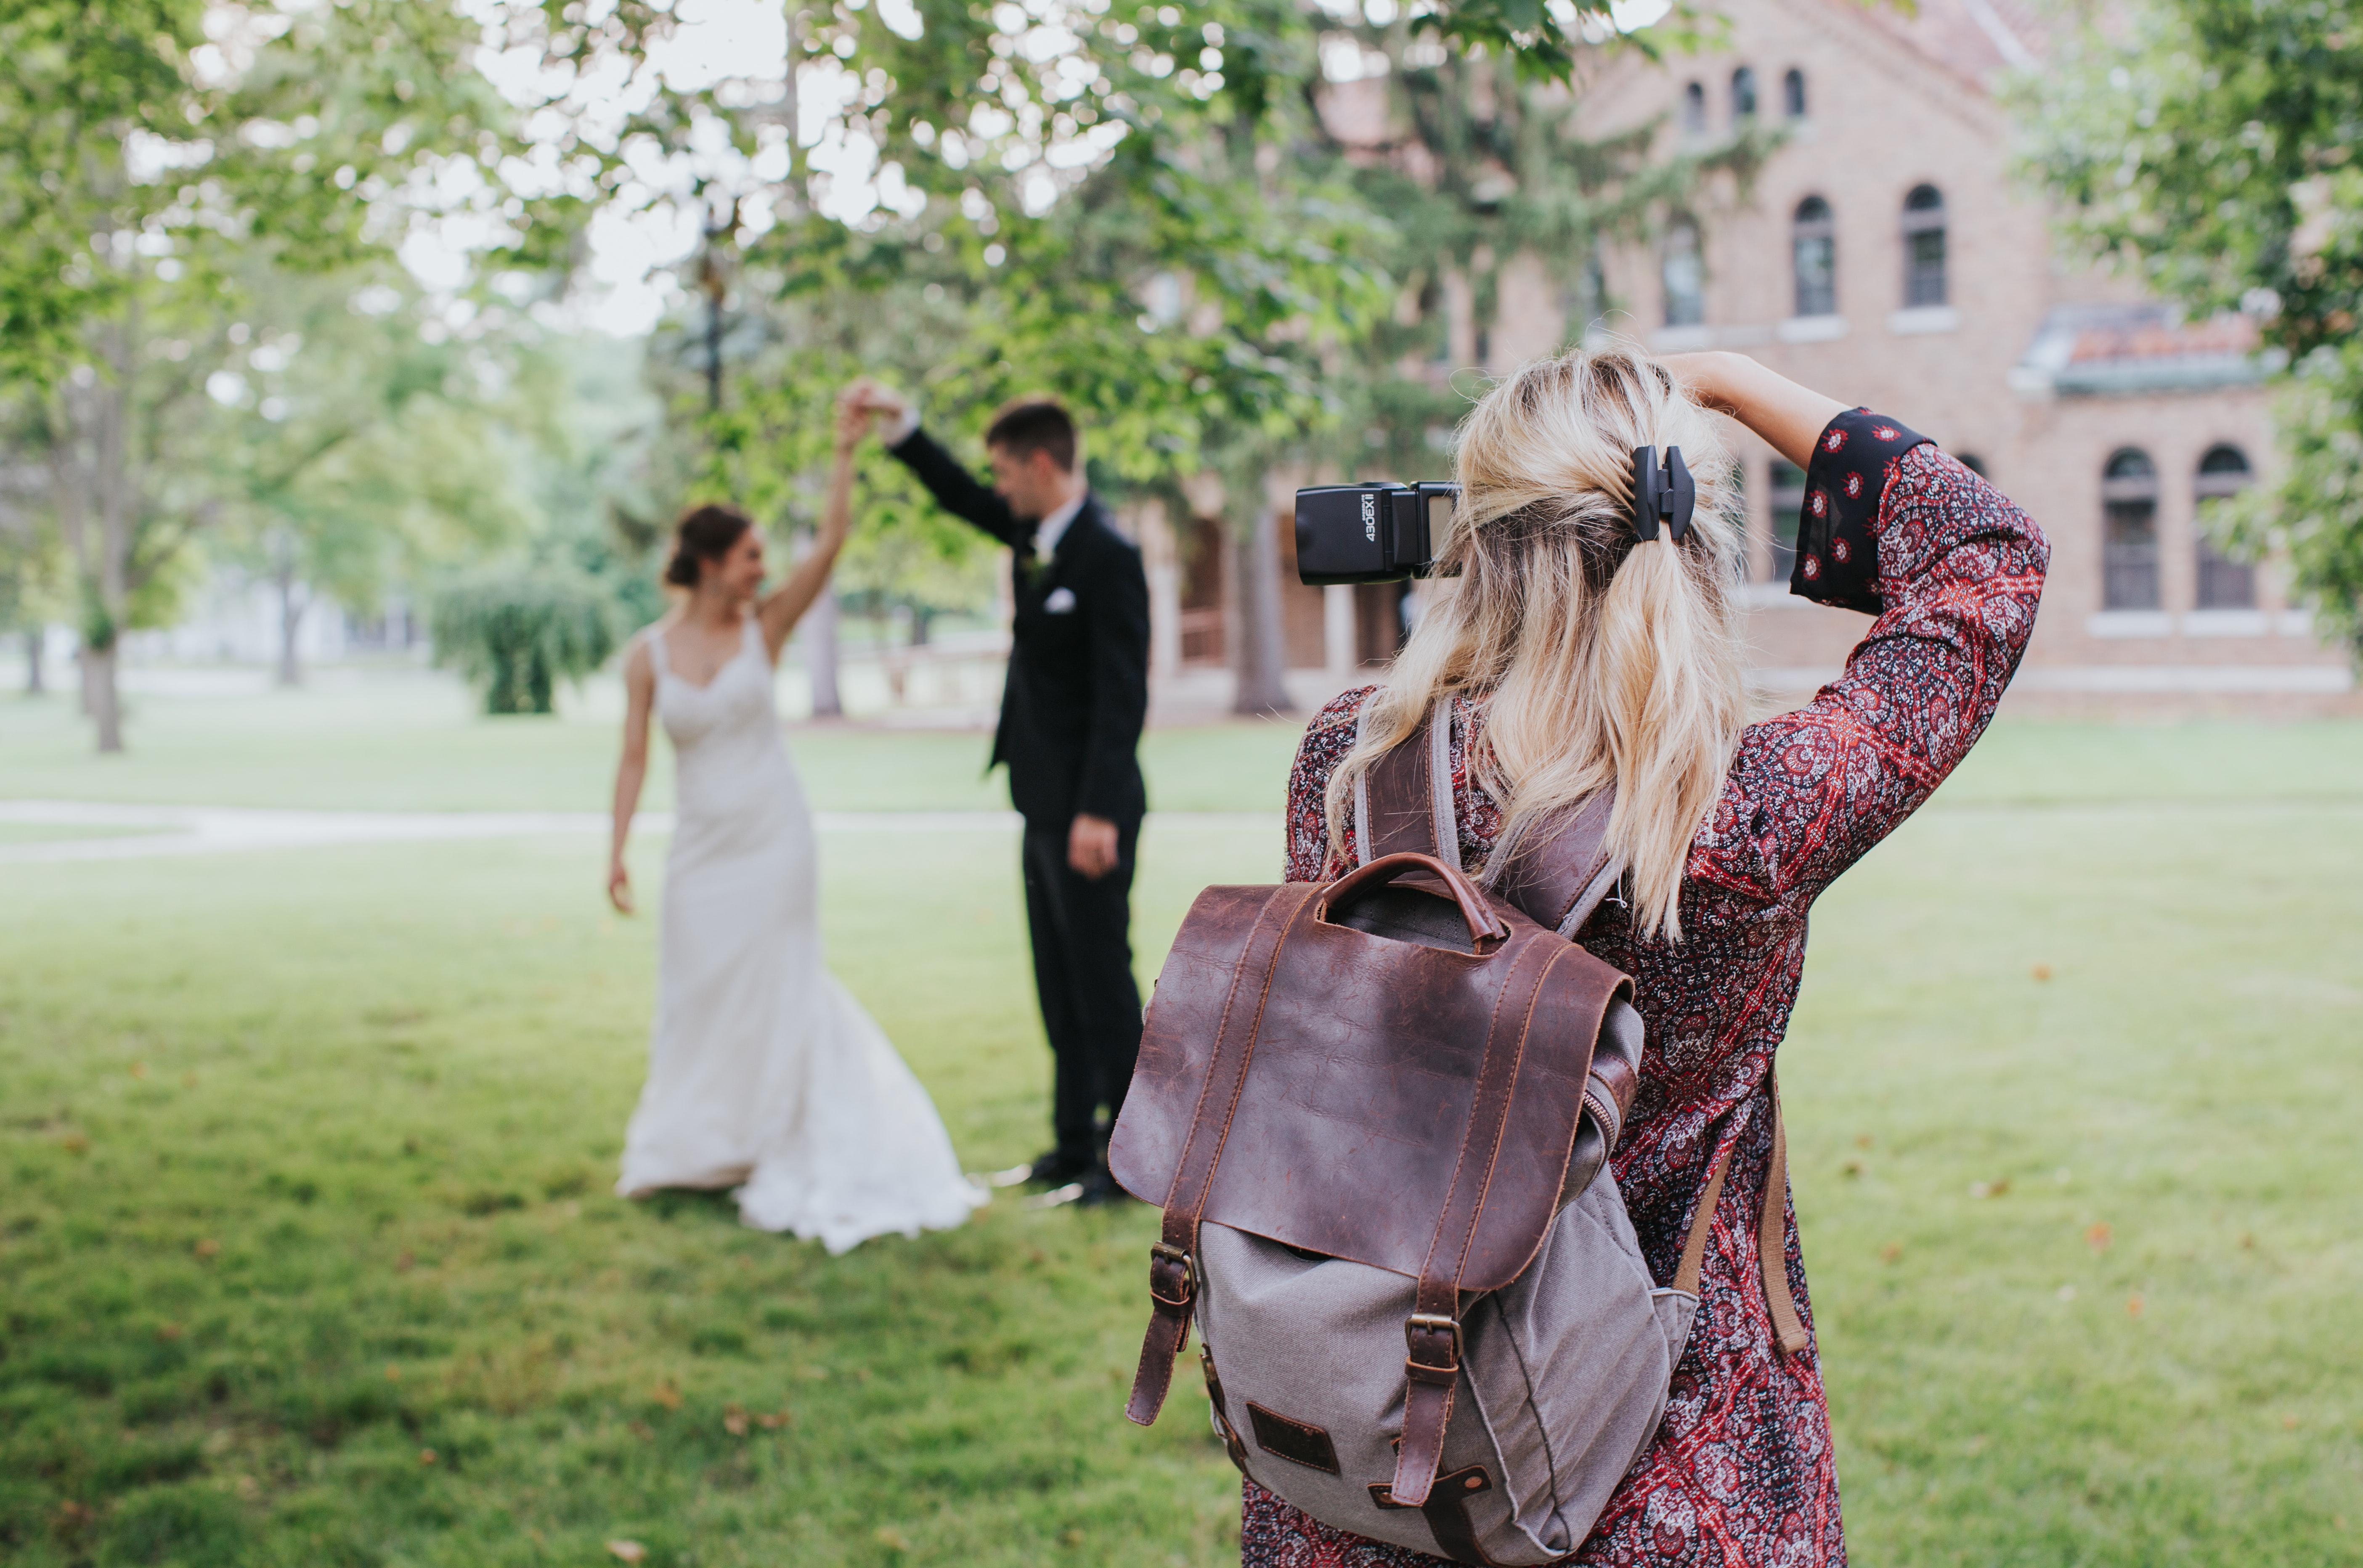 A photographer takes a photo of a bride and groom.